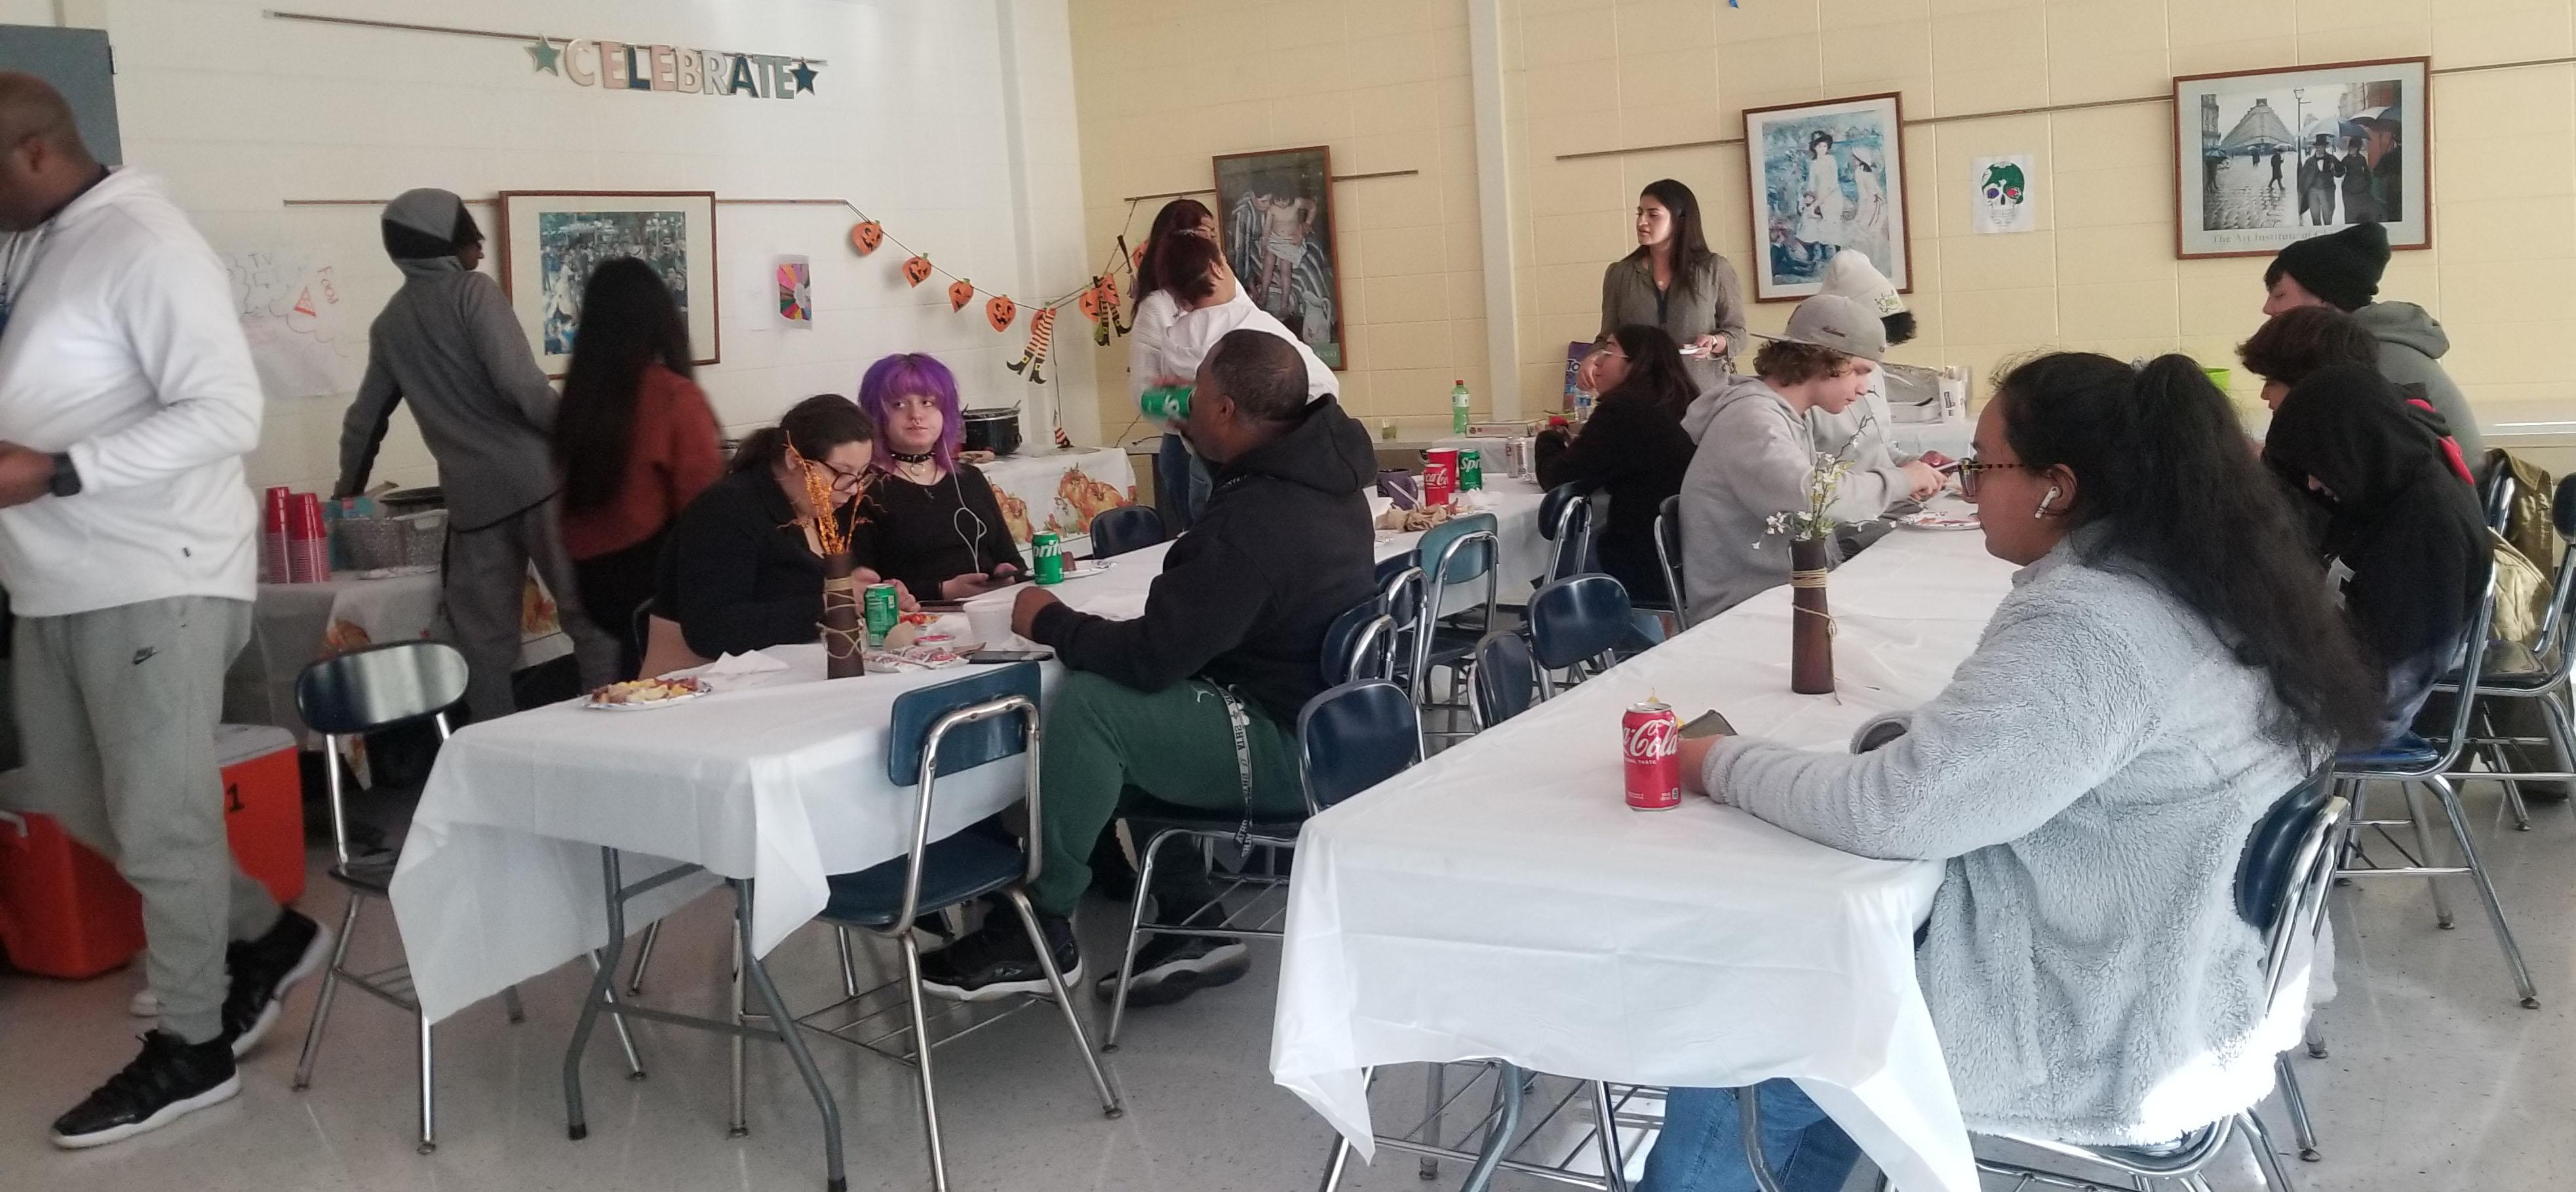 Addison Trail ACHIEVE Department hosts annual Thanksgiving lunch